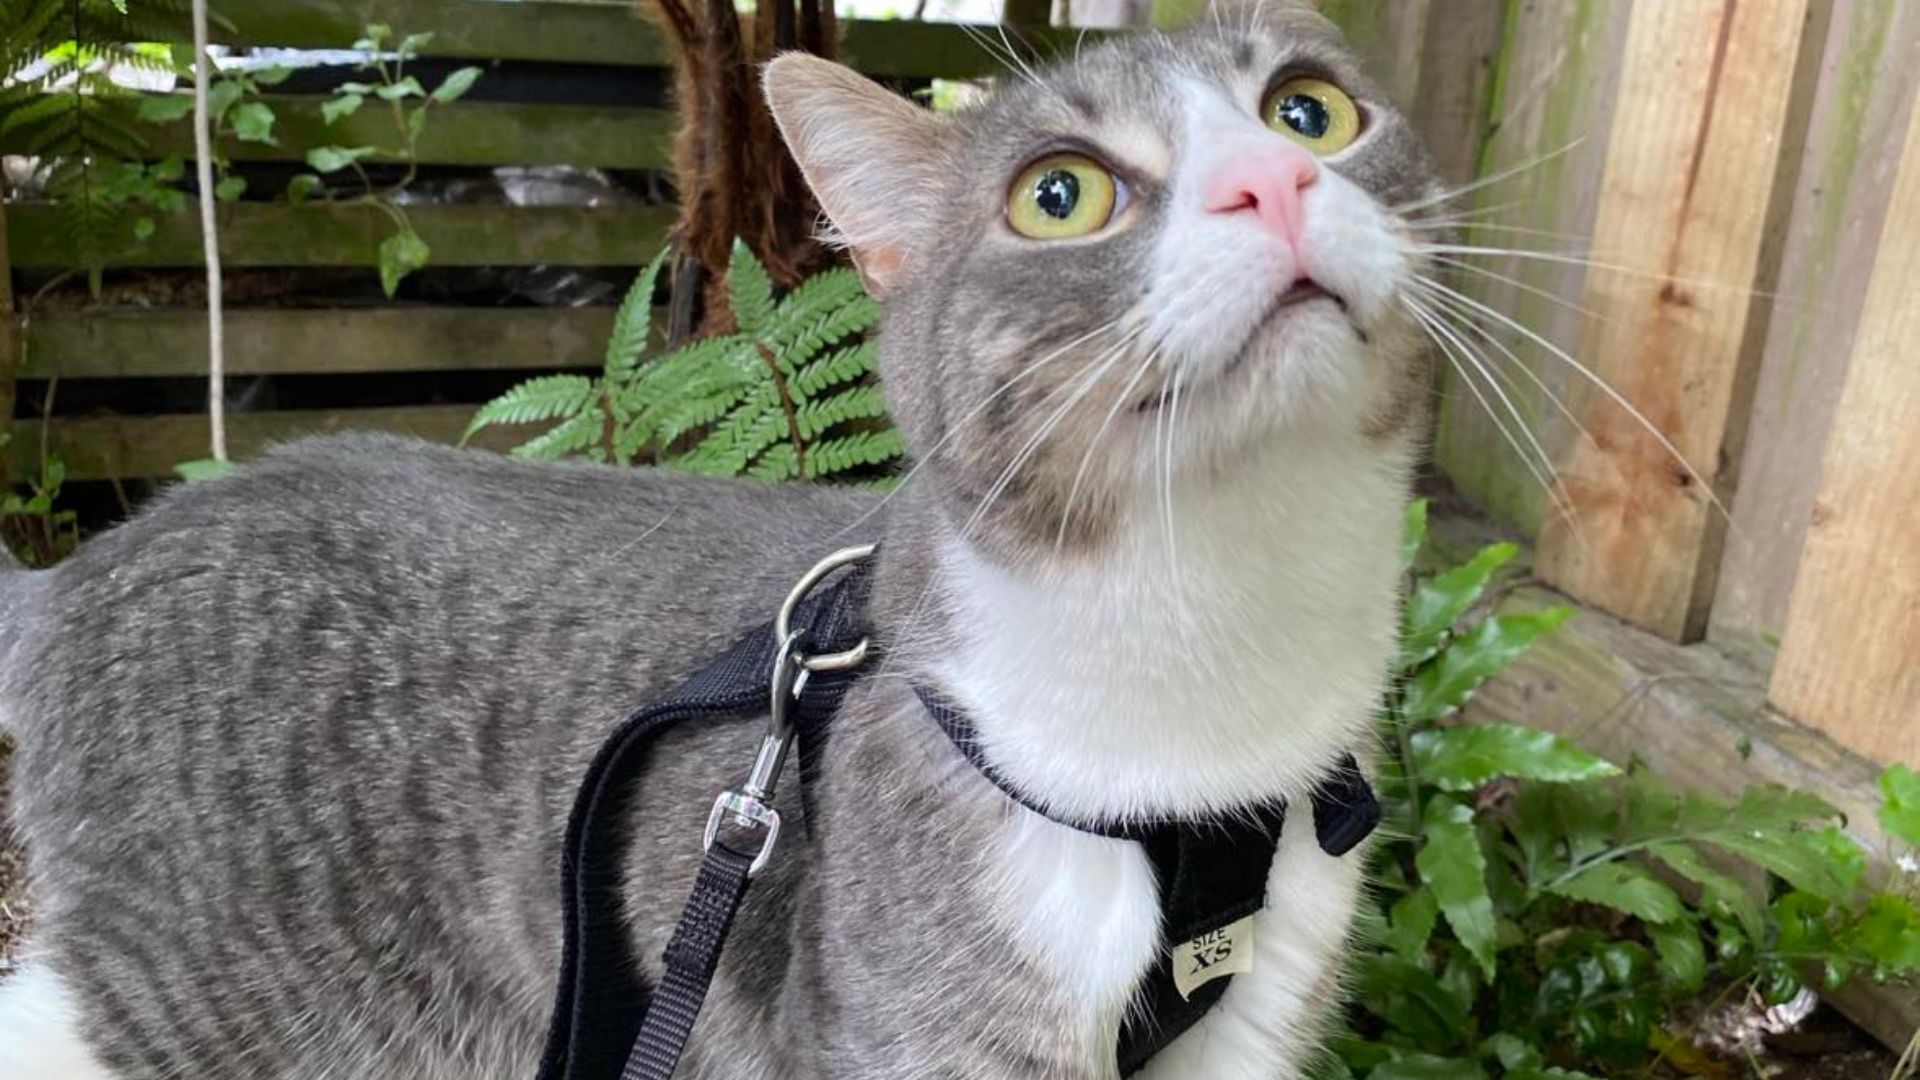 A cat on a leash outside.